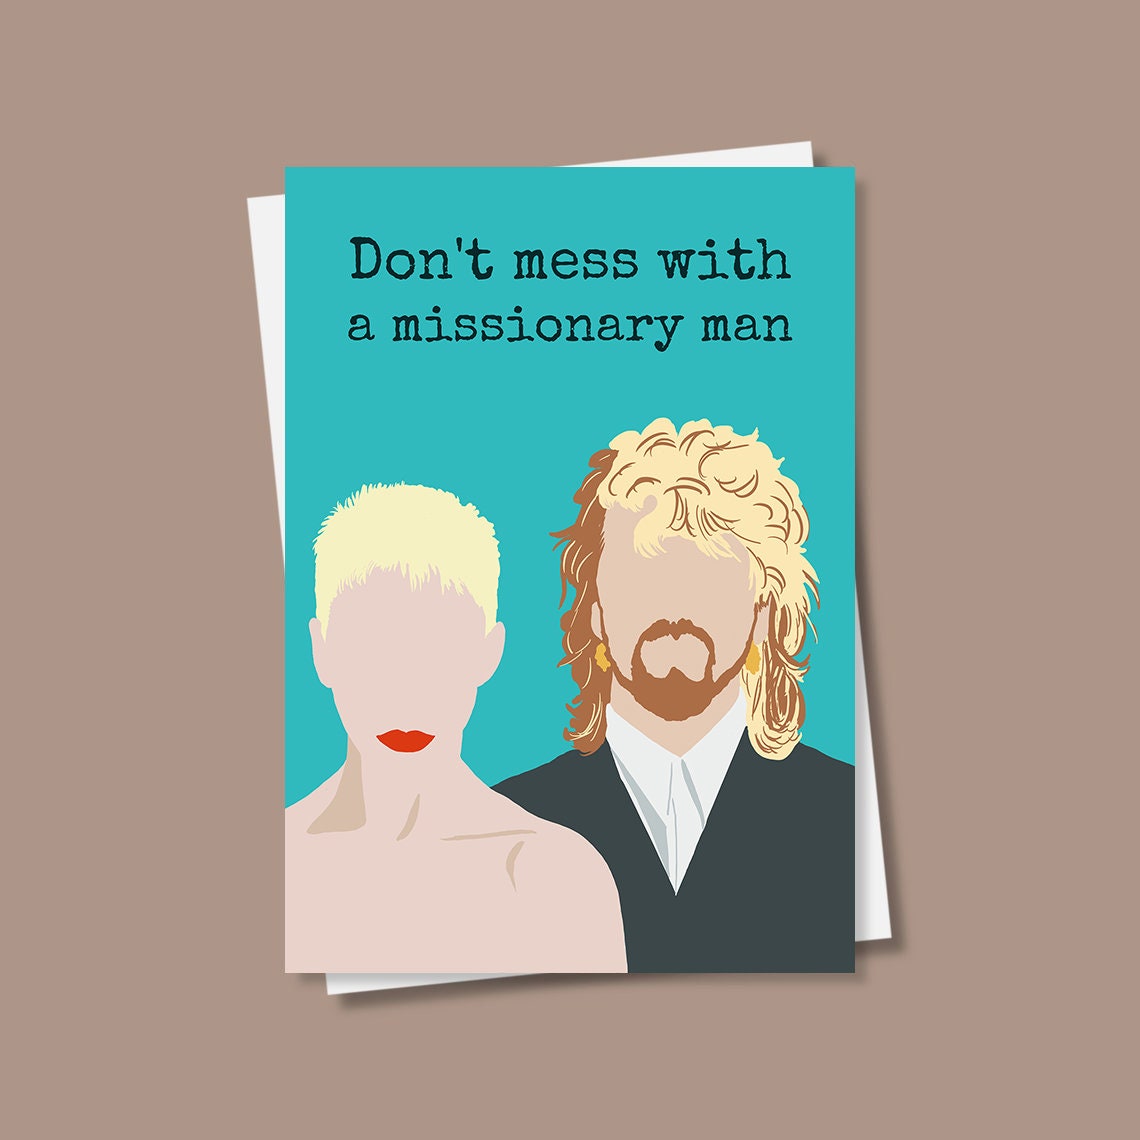 Eurythmics inspired postcards, set of 4, new wave card, 80s music, gift for new wave music fan, music postcard, Missionary Man, Annie Lennox